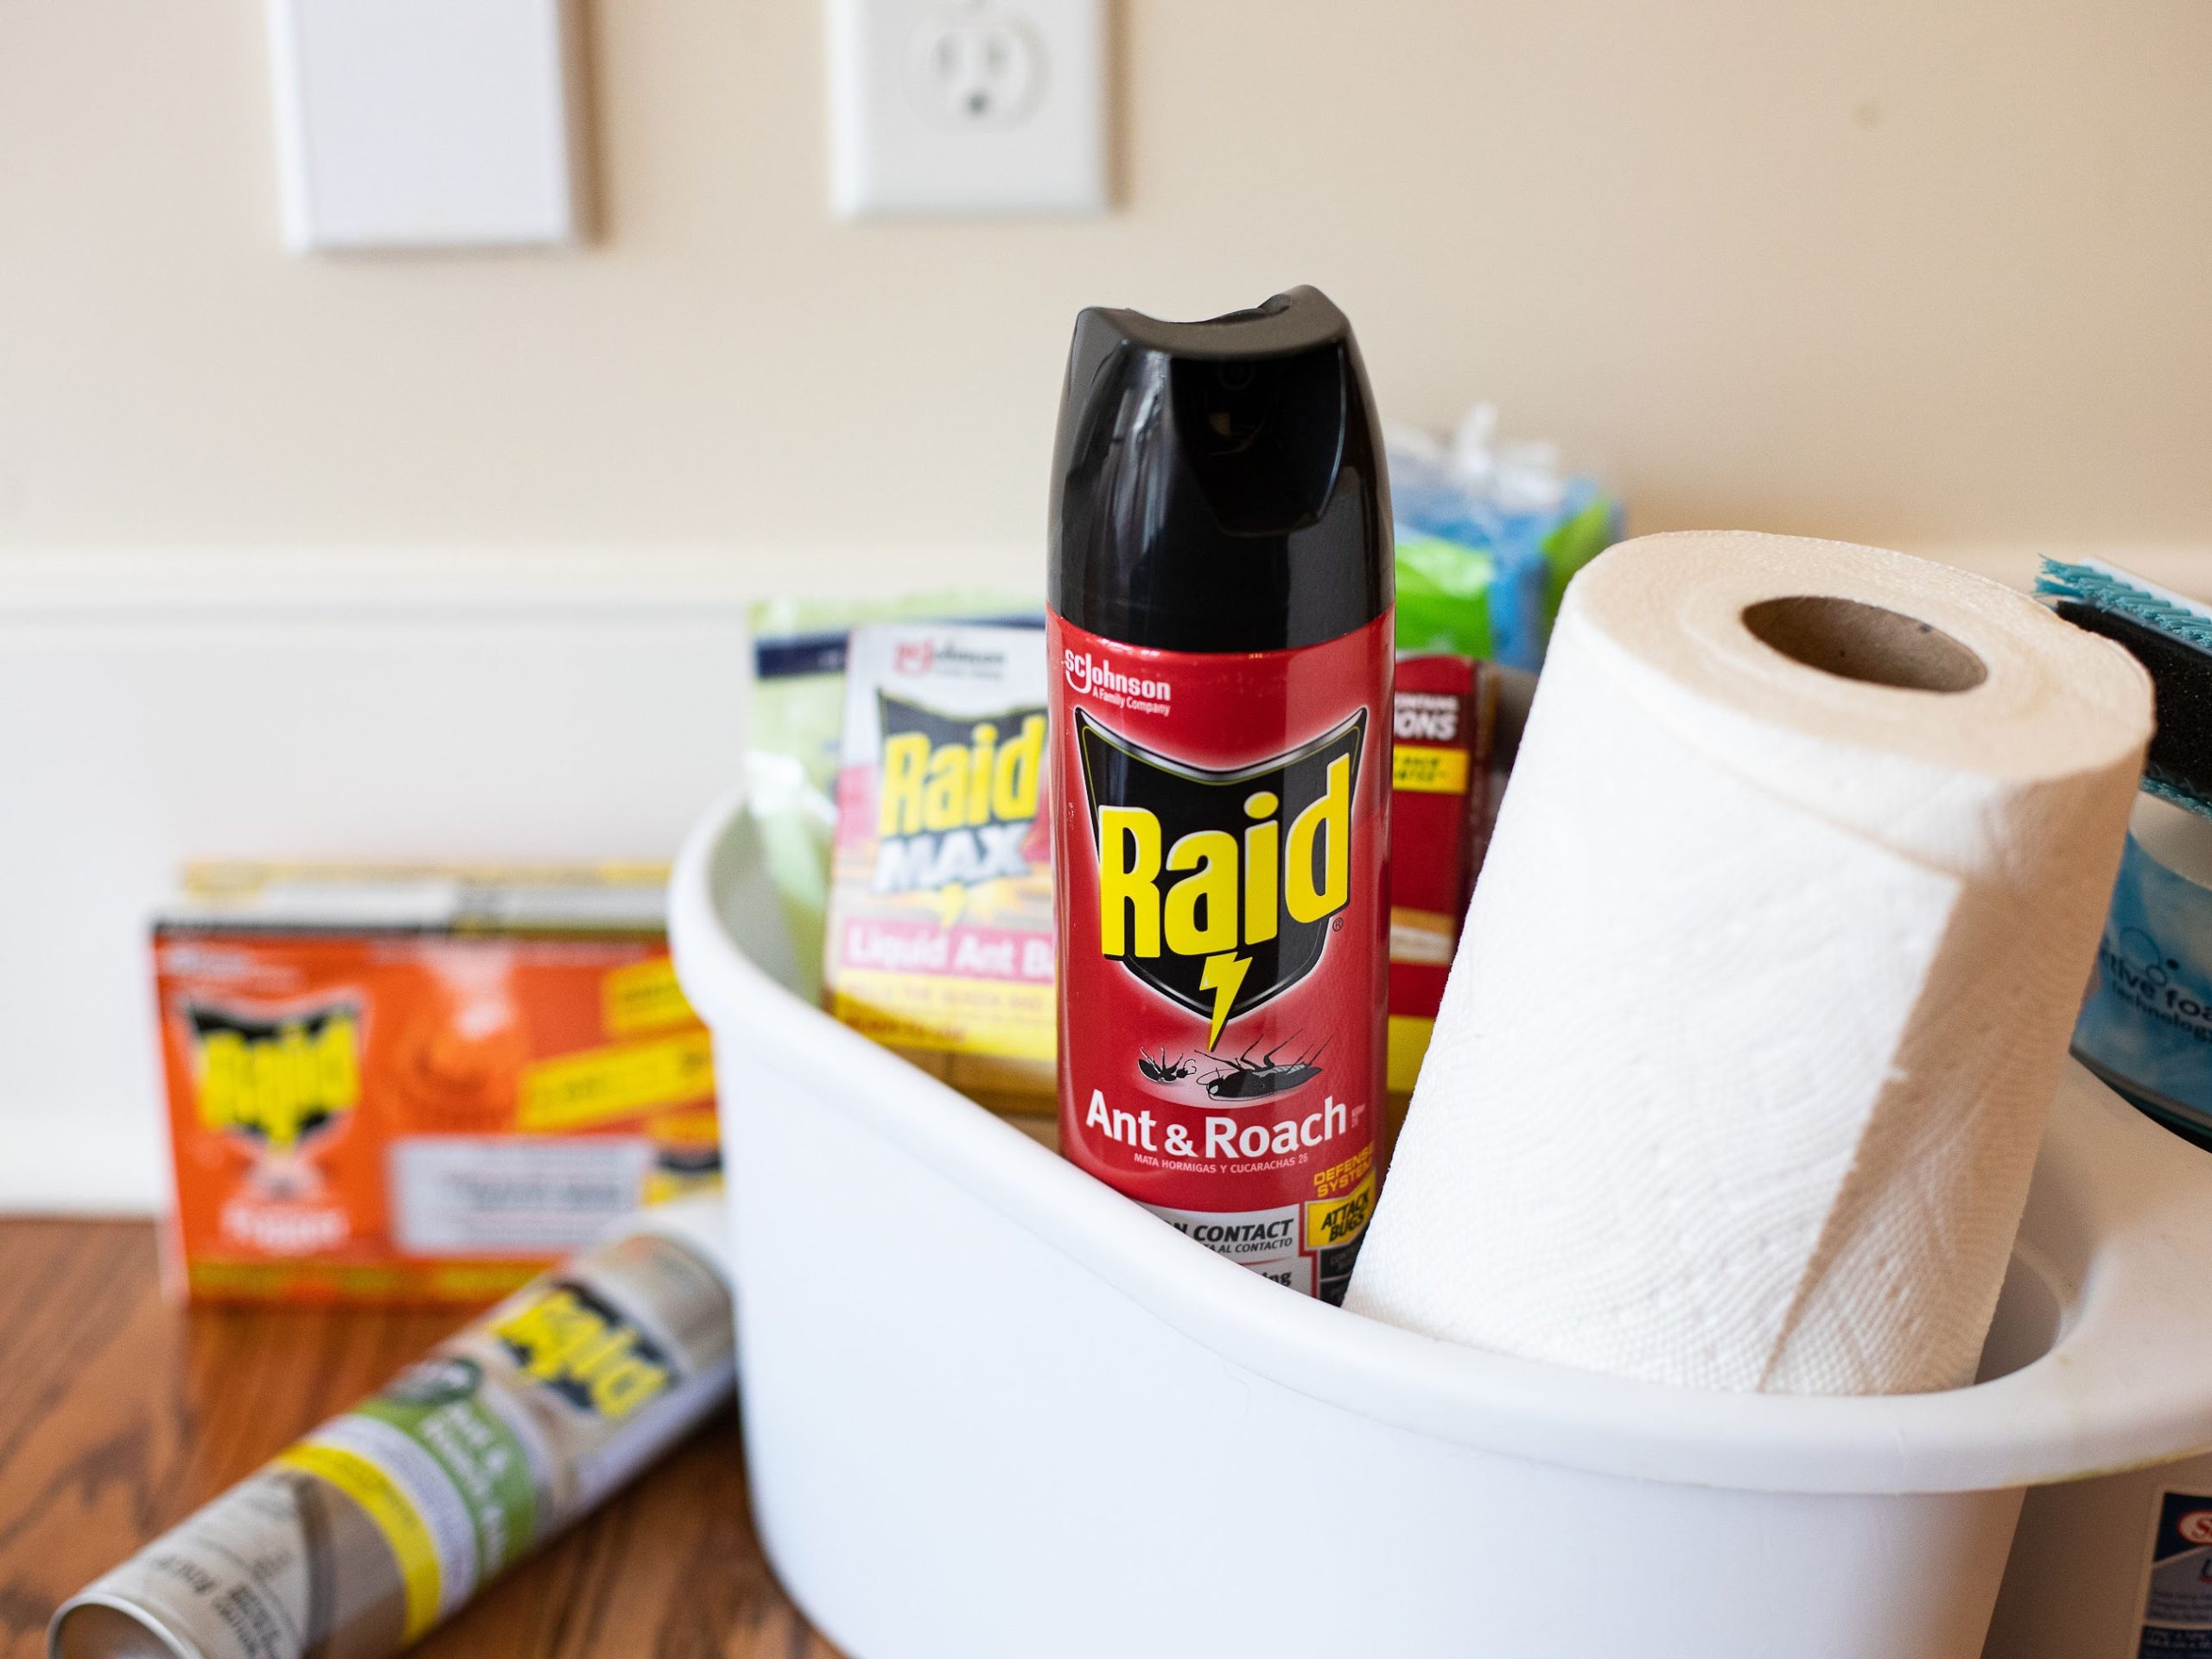 Great Deals On Raid® Products At Publix - Get Rid Of The Pests That Bug You! on I Heart Publix